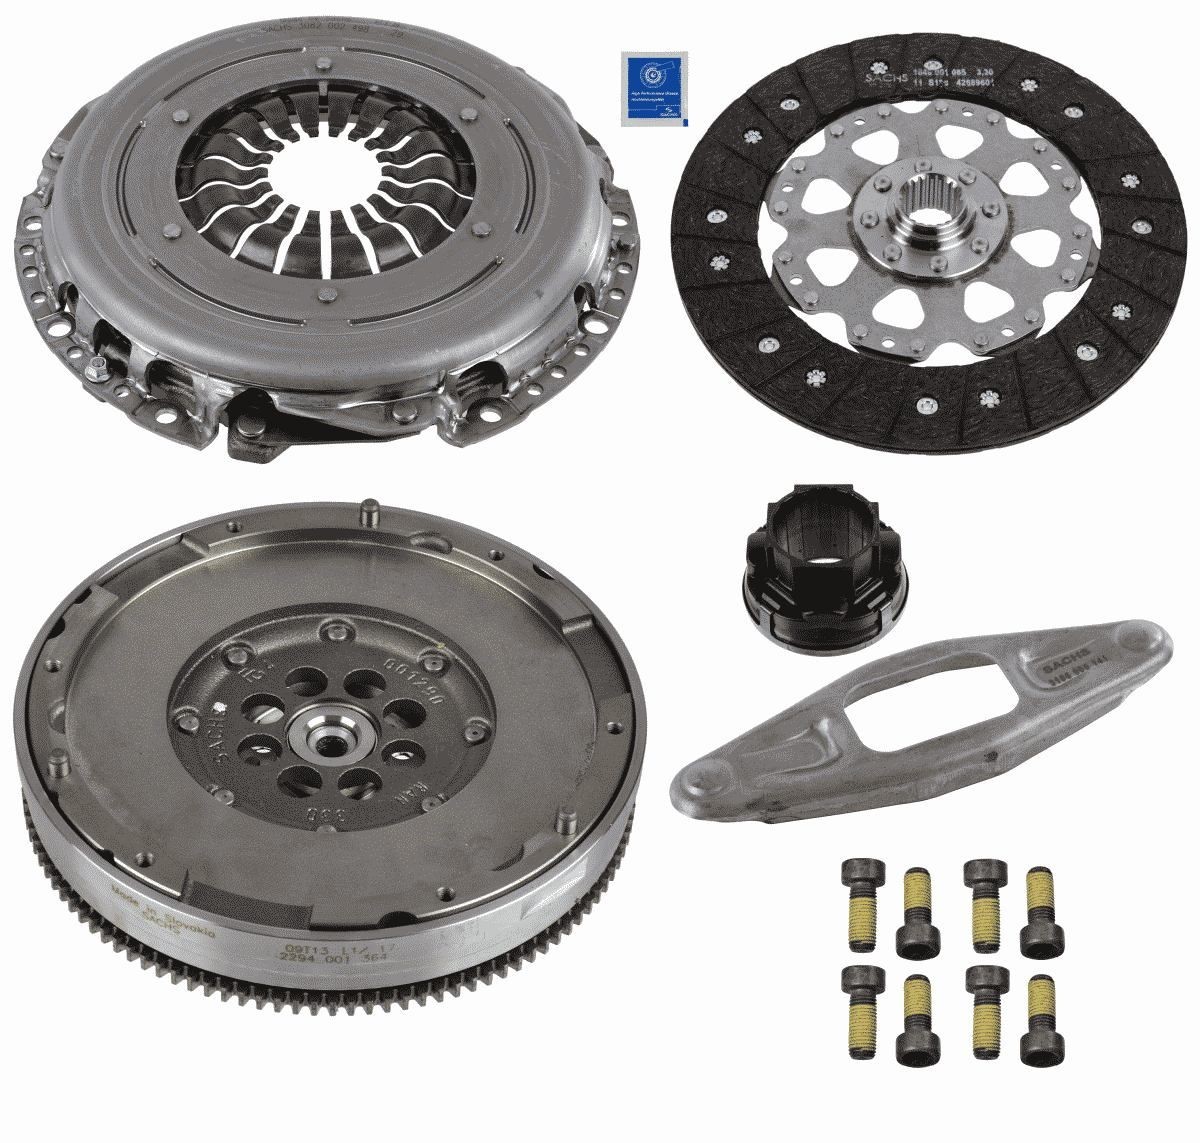 Clutch kit 2290 601 127 from SACHS